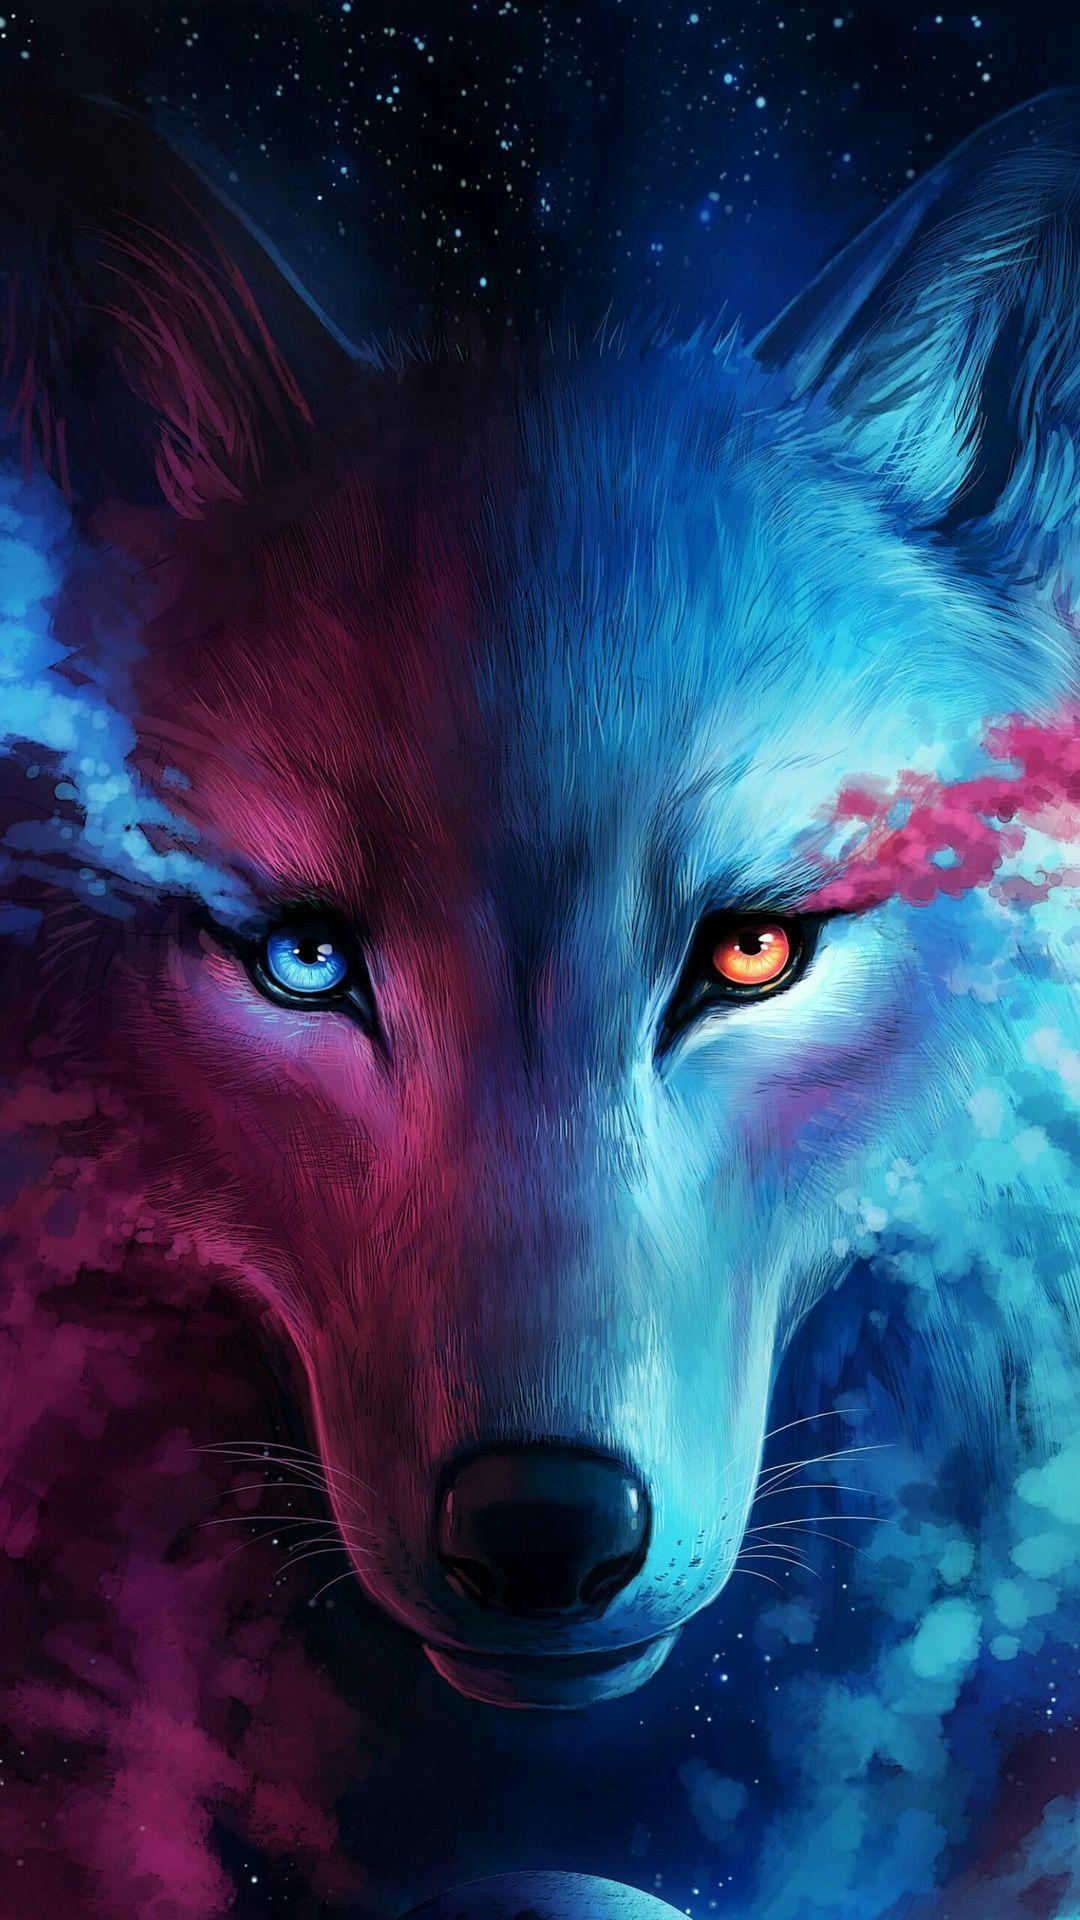 Cosmic Wolf to see more creative wallpaper! - ART